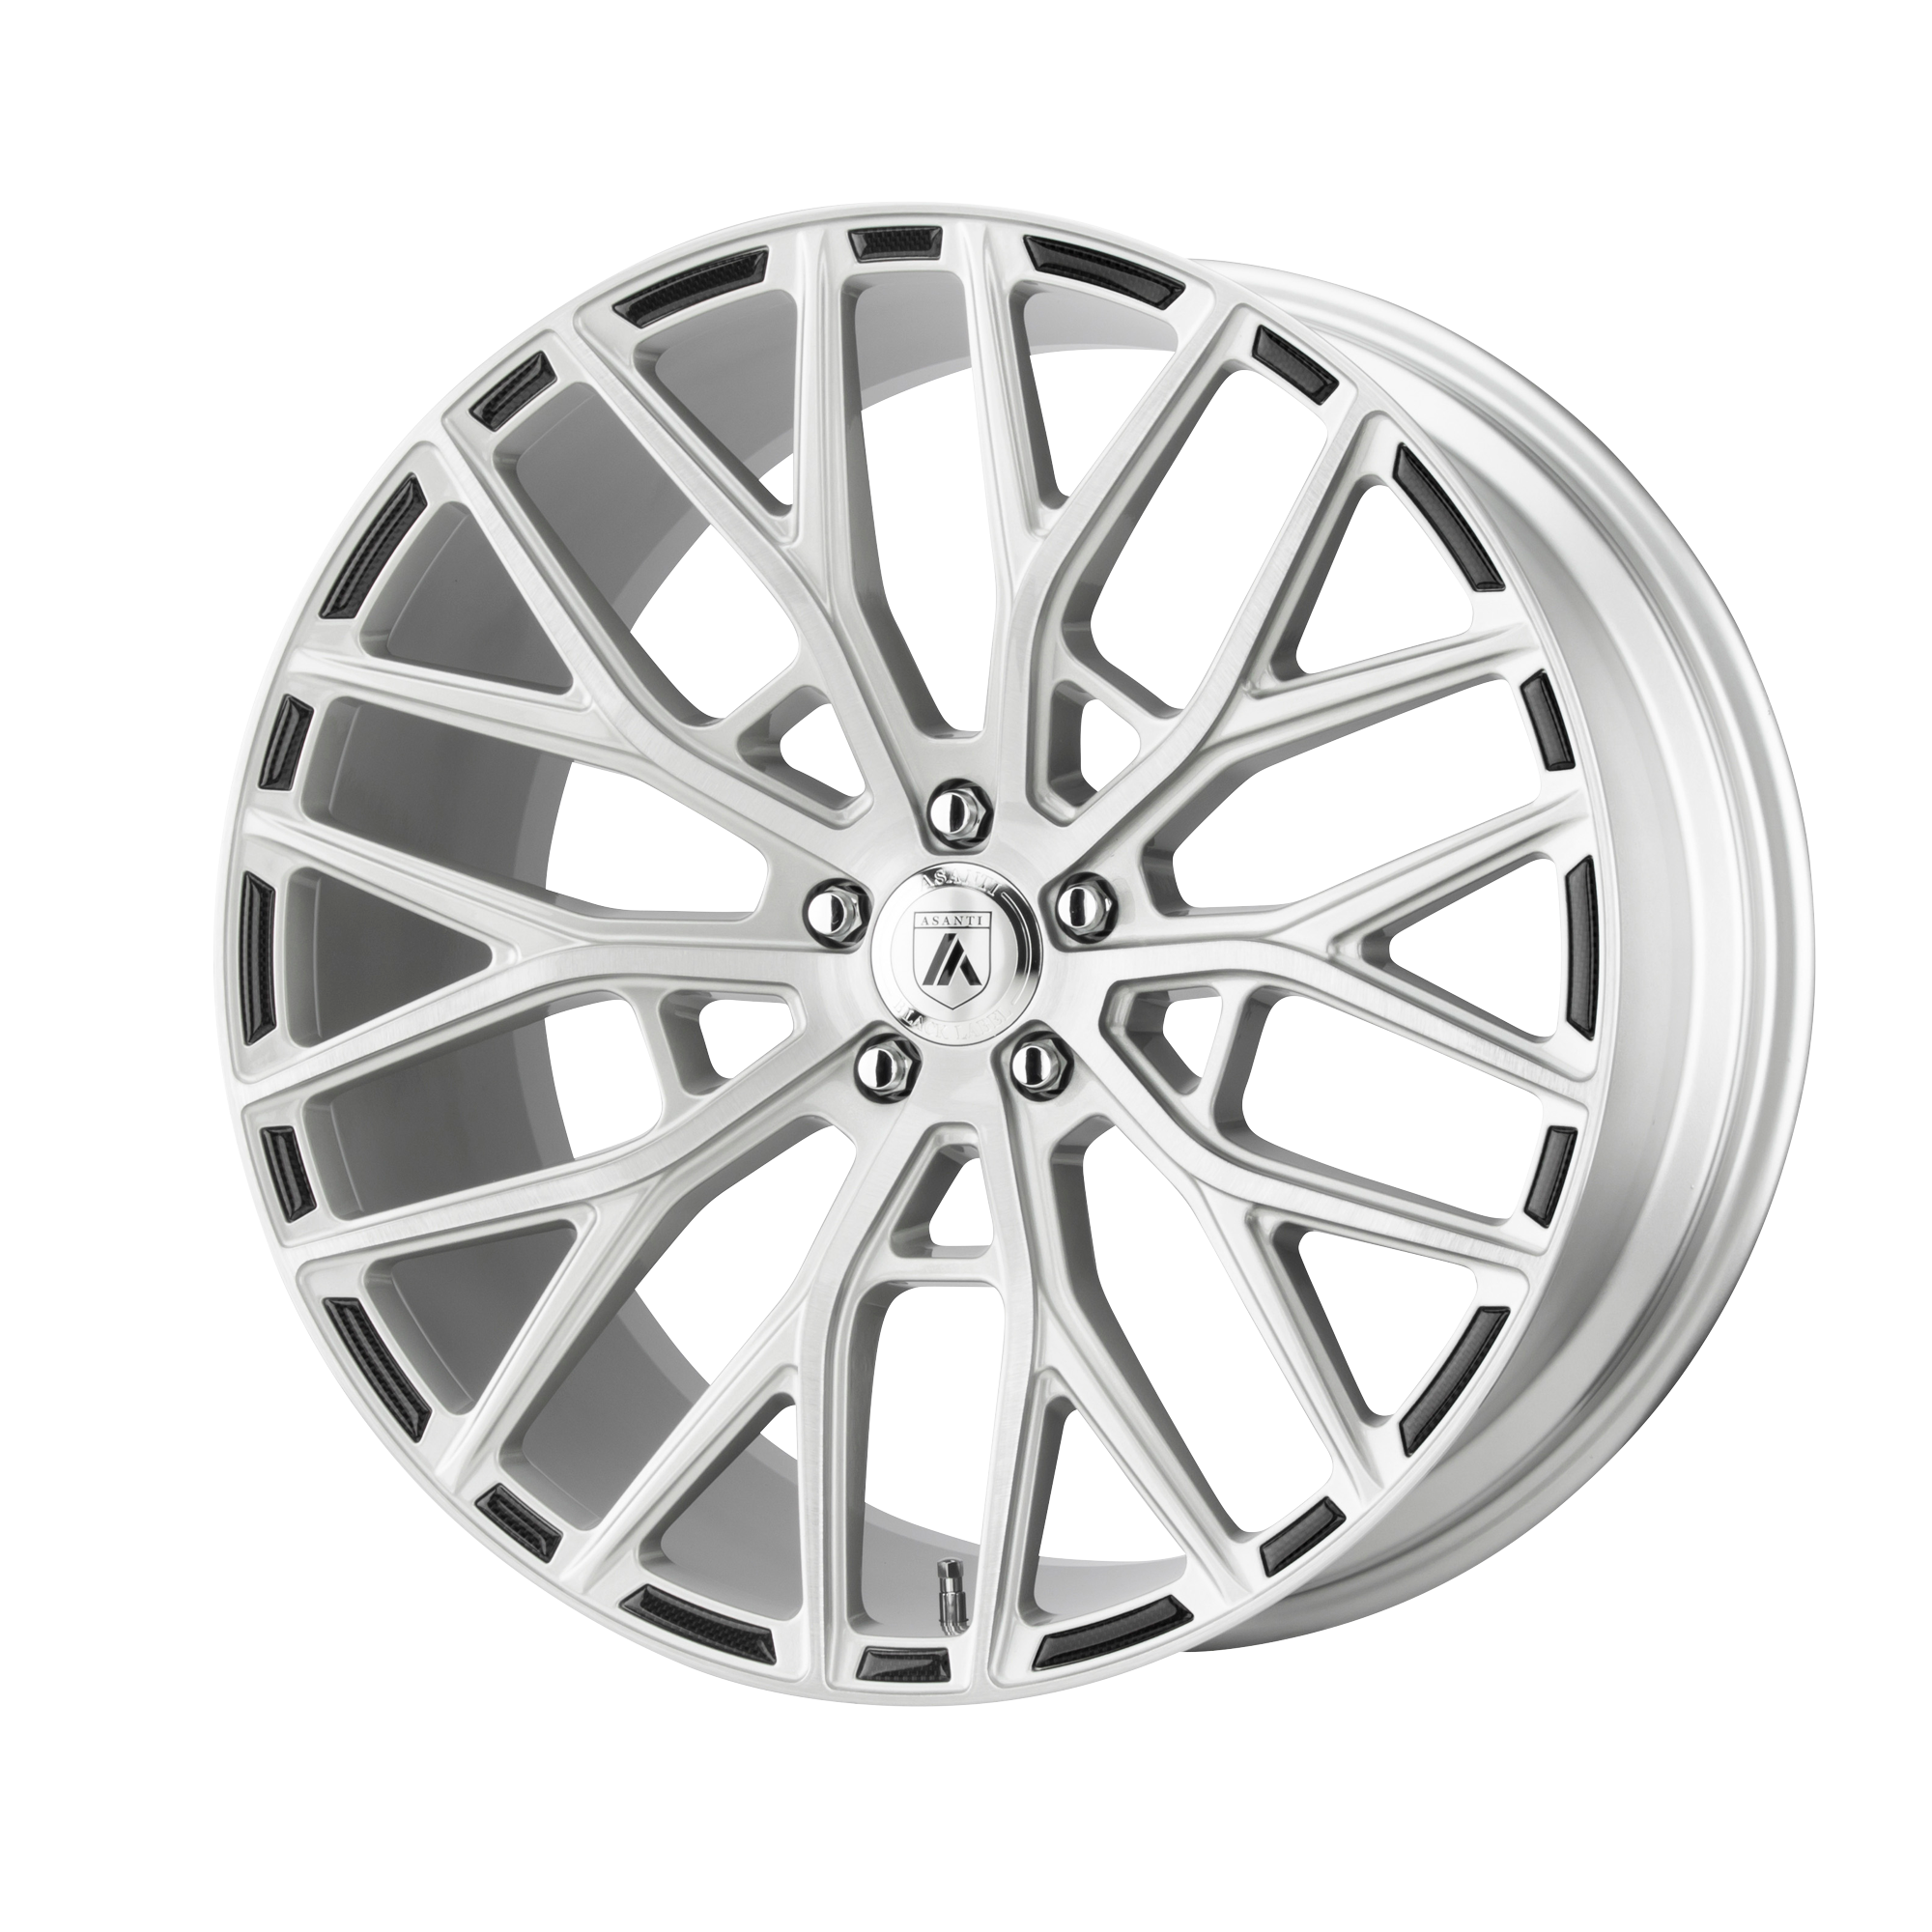 LEO 20x9 Blank BRUSHED SILVER (15 mm) - Tires and Engine Performance